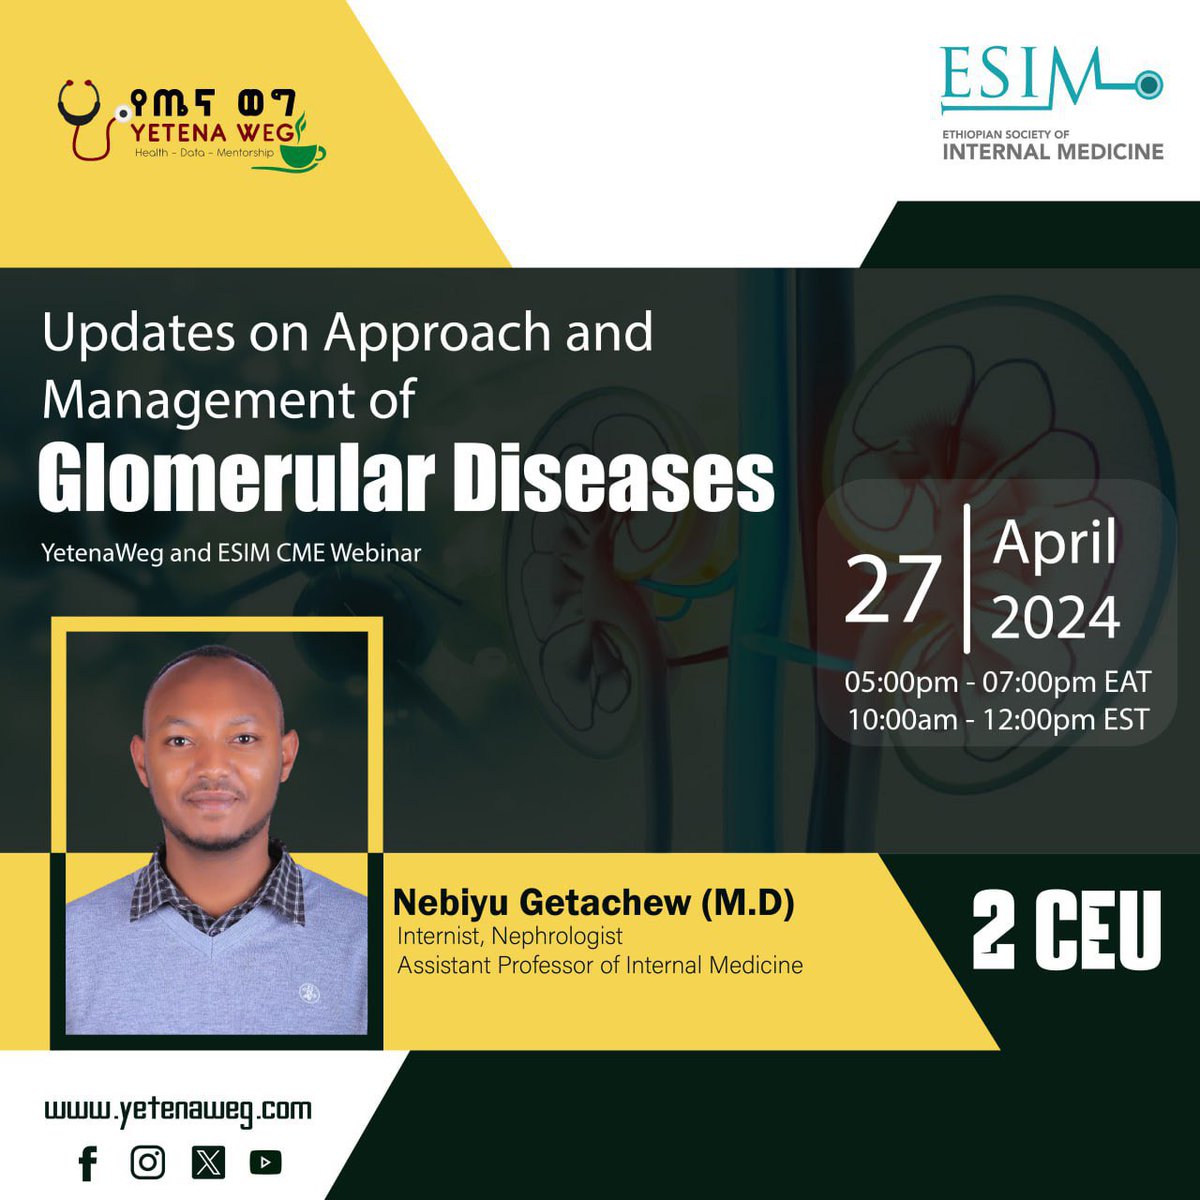 Yetena Weg in collaboration with @ESIMethiopian presents you: Updates on Approach and Management of Glomerular Diseases By Dr. Nebiyu Getachew (Nephrologist, Assistant Professor of Internal Medicine) 🗓 Date: Apr 27, 2024 🕔 Time: 05:00 PM - 07:00 PM (Ethiopian Time)